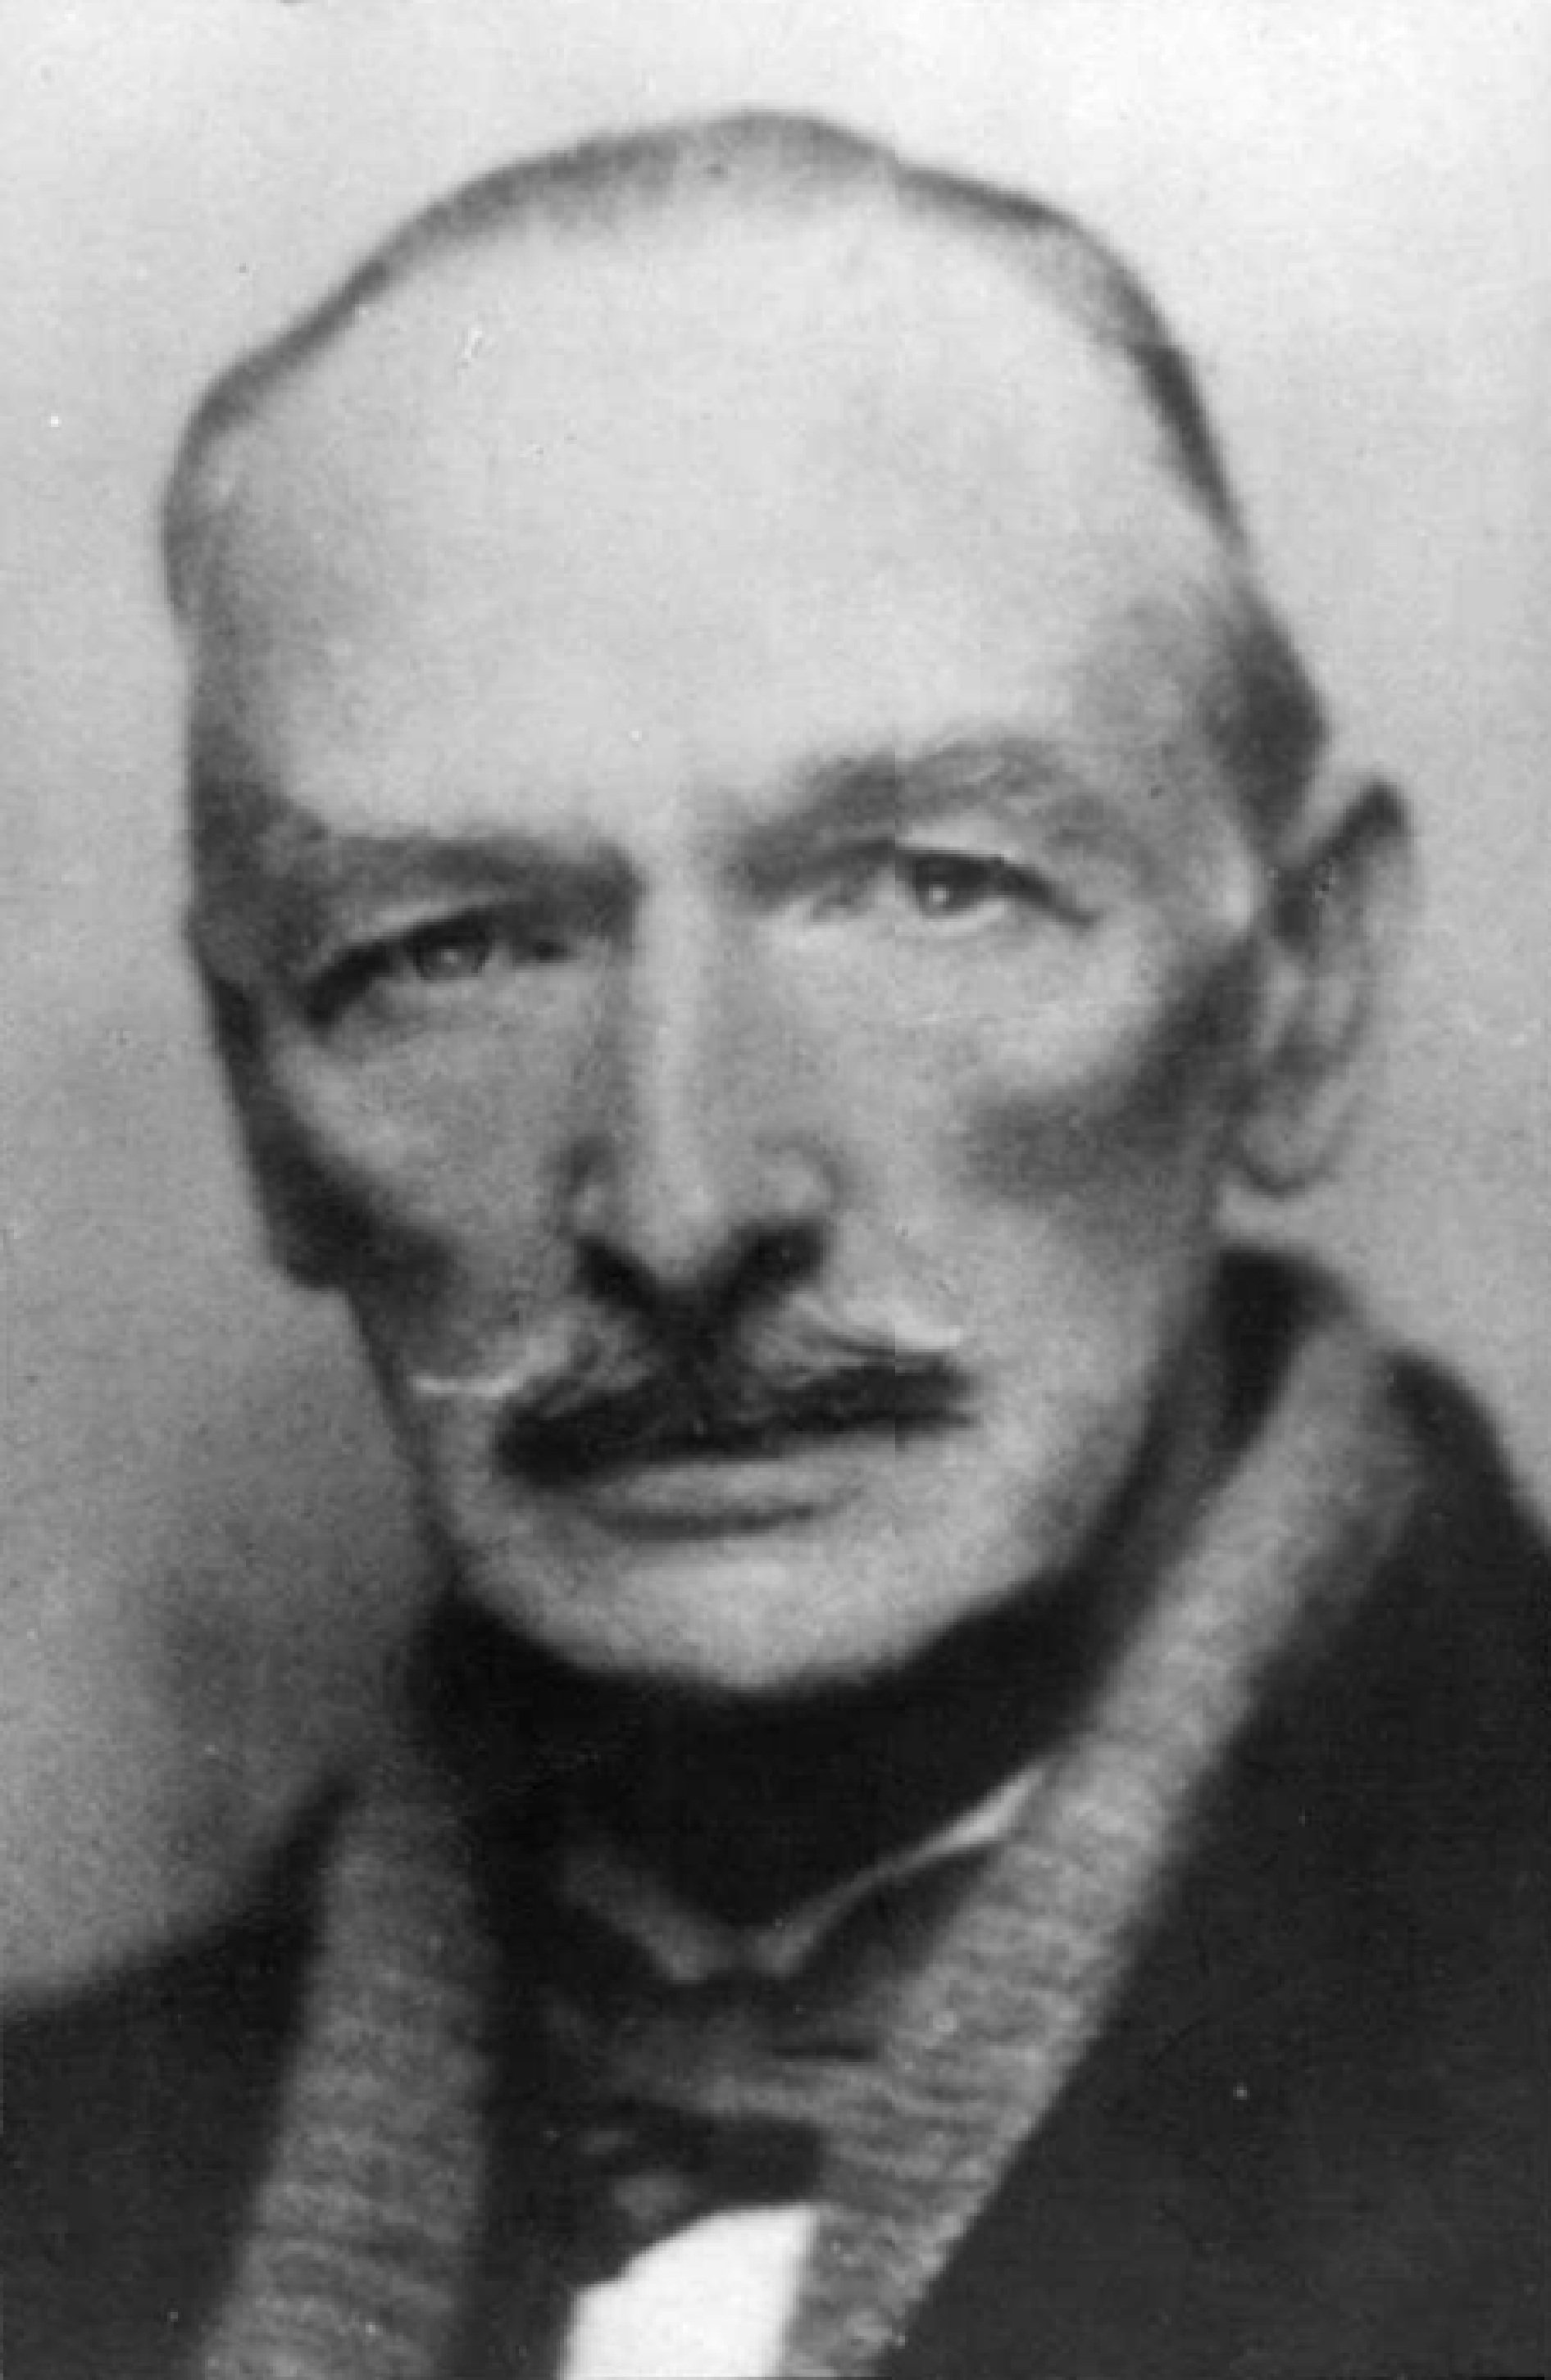 The photograph shows Wilson almost full faced. He sports a moustache that covers his upper lip. He is wearing a scarf and coat and a bowtie is visible. The photograph is soft focused.